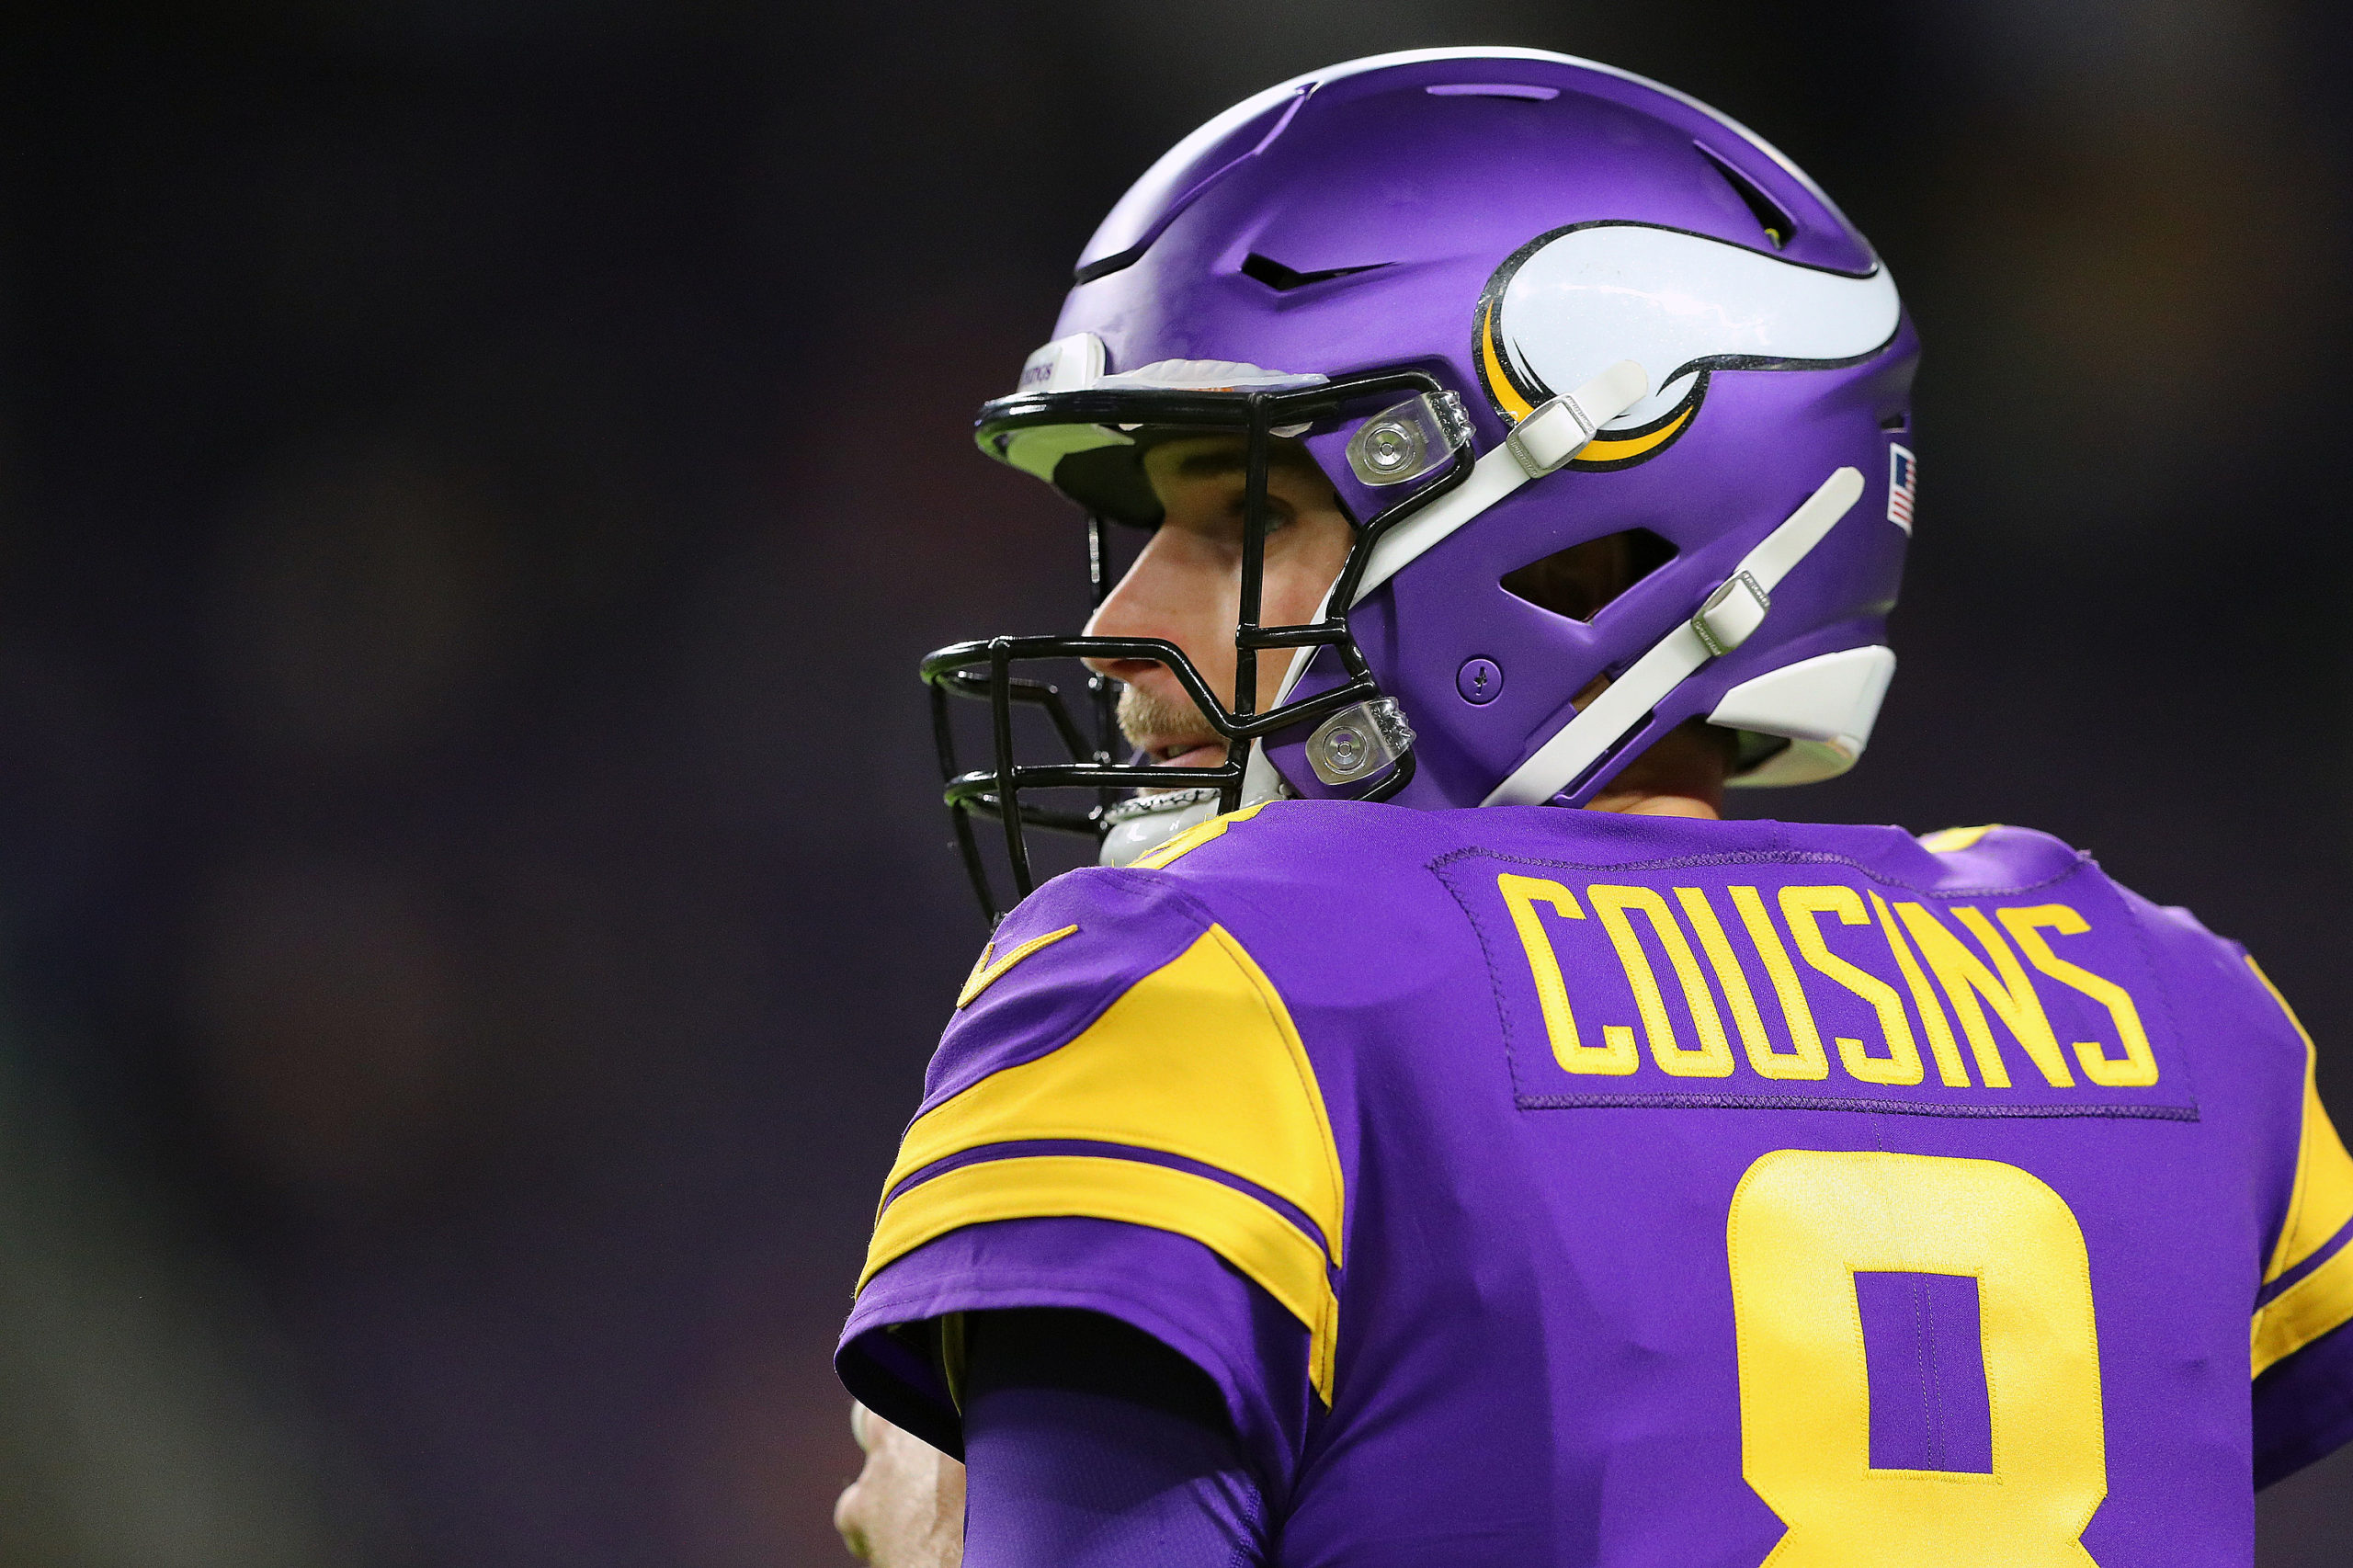 MINNEAPOLIS, MN - OCTOBER 24: Kirk Cousins #8 of the Minnesota Vikings warms up before the game against the Washington Redskins at U.S. Bank Stadium on October 24, 2019 in Minneapolis, Minnesota. Adam Bettcher/Getty Images